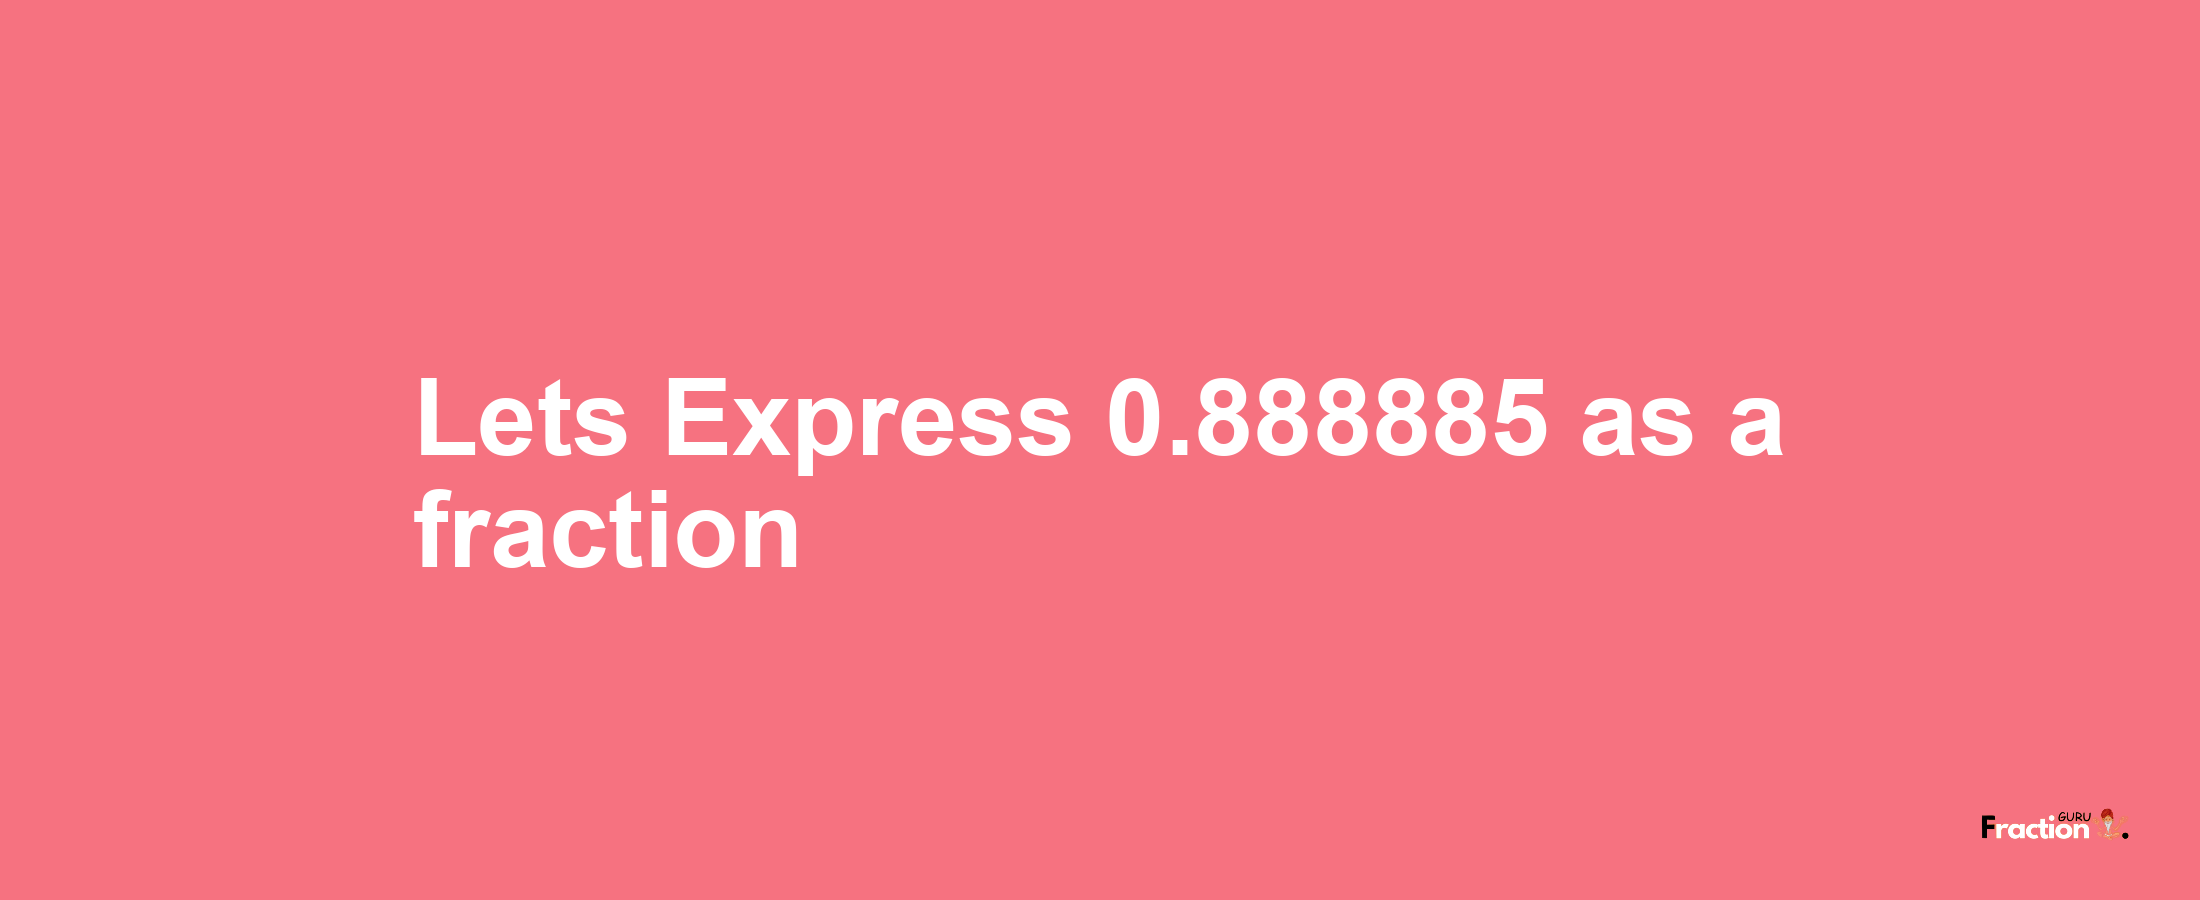 Lets Express 0.888885 as afraction